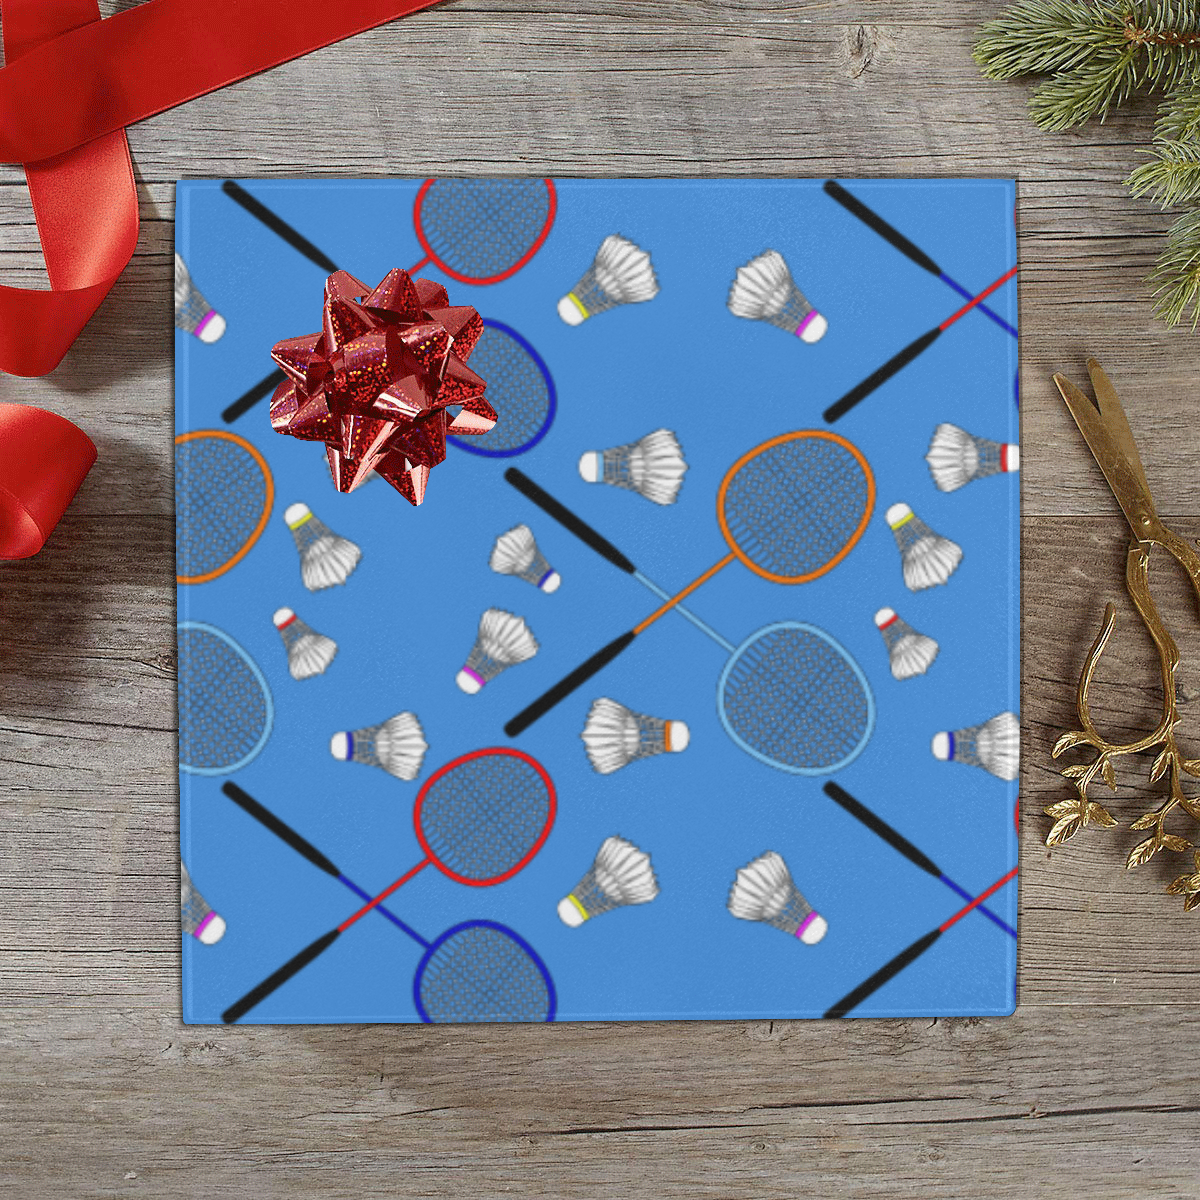 Badminton Rackets and Shuttlecocks Pattern Sports Blue Gift Wrapping Paper 58"x 23" (2 Rolls)